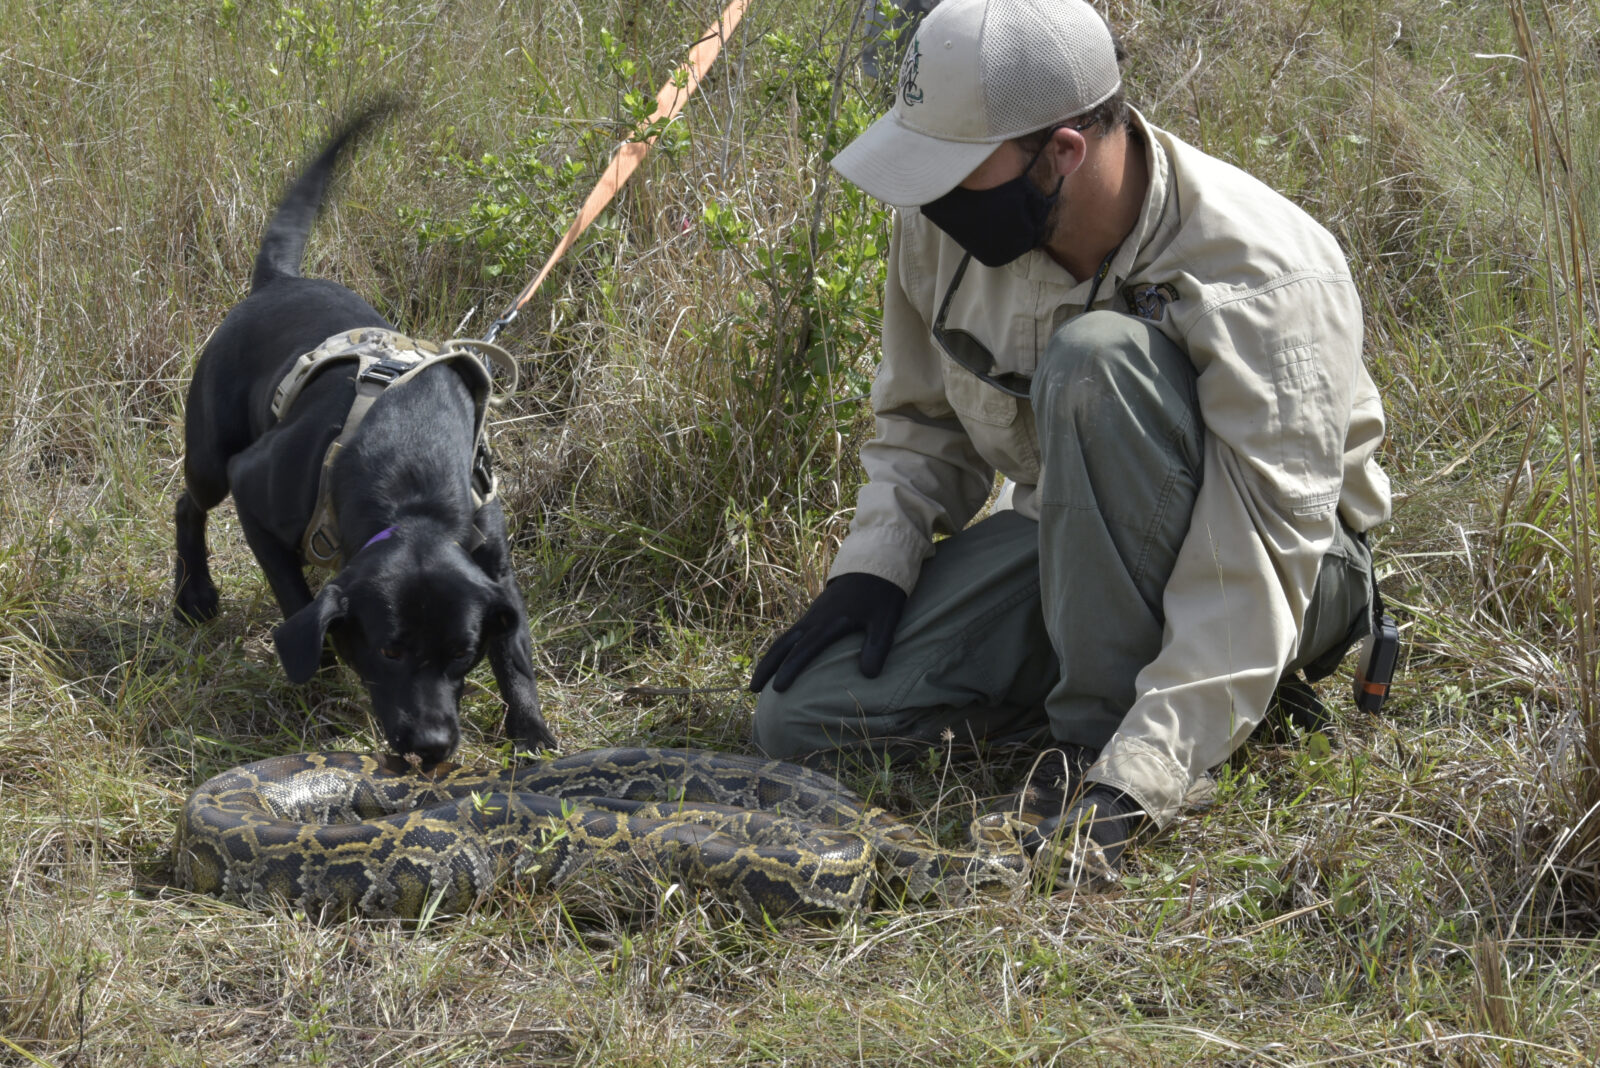 A black dog sniffs a large snake. A person wearing a uniform and face mask is next to the dog.